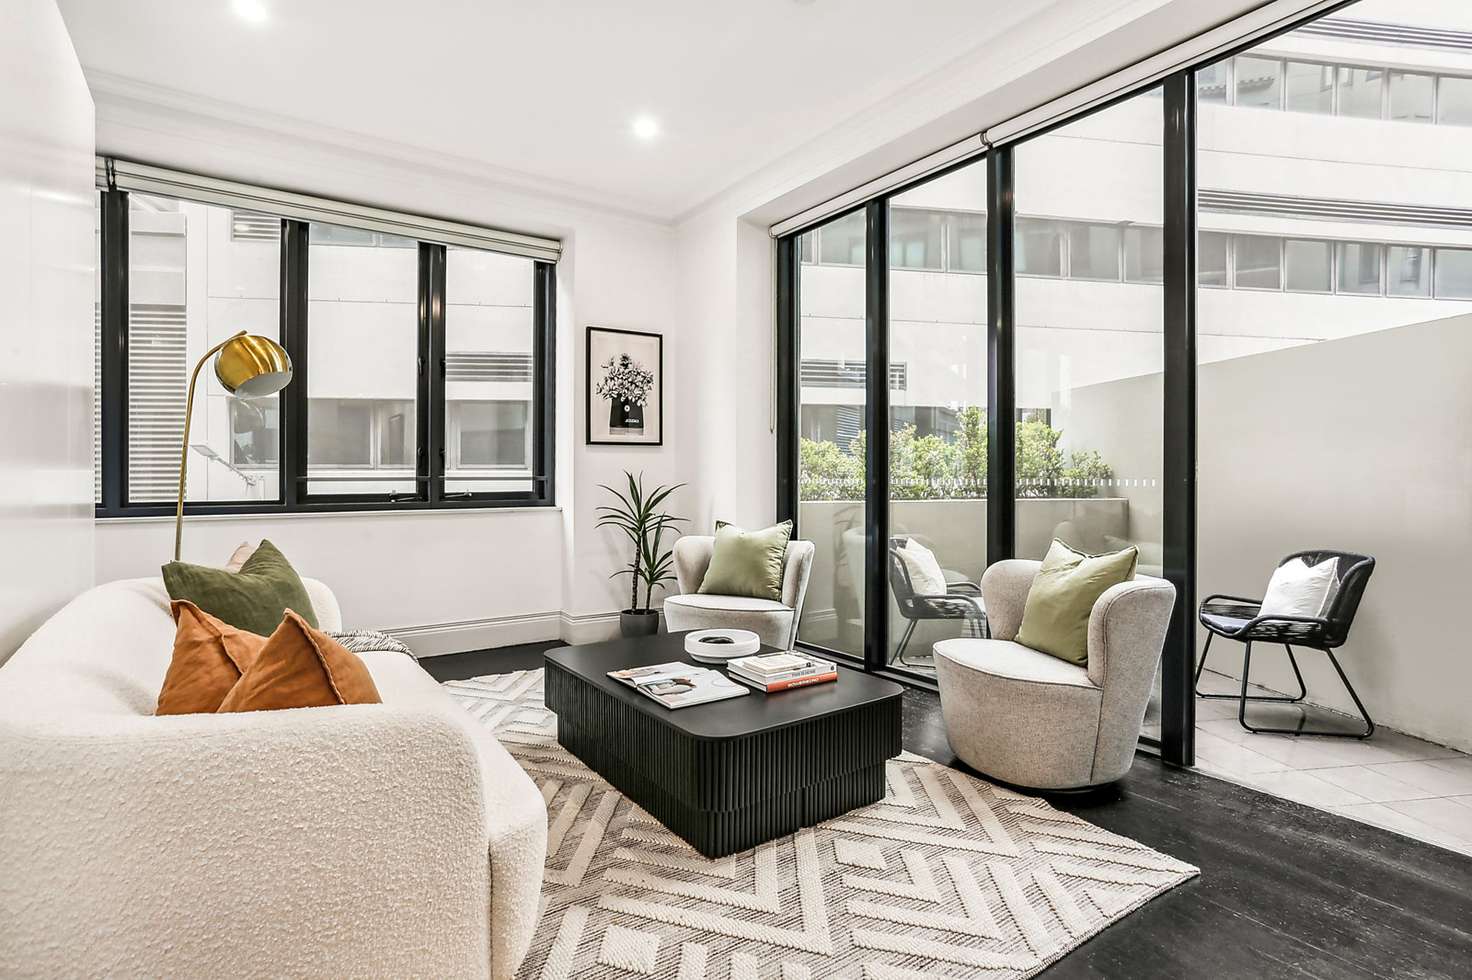 Main view of Homely apartment listing, 207/13-15 Bayswater Road, Potts Point NSW 2011